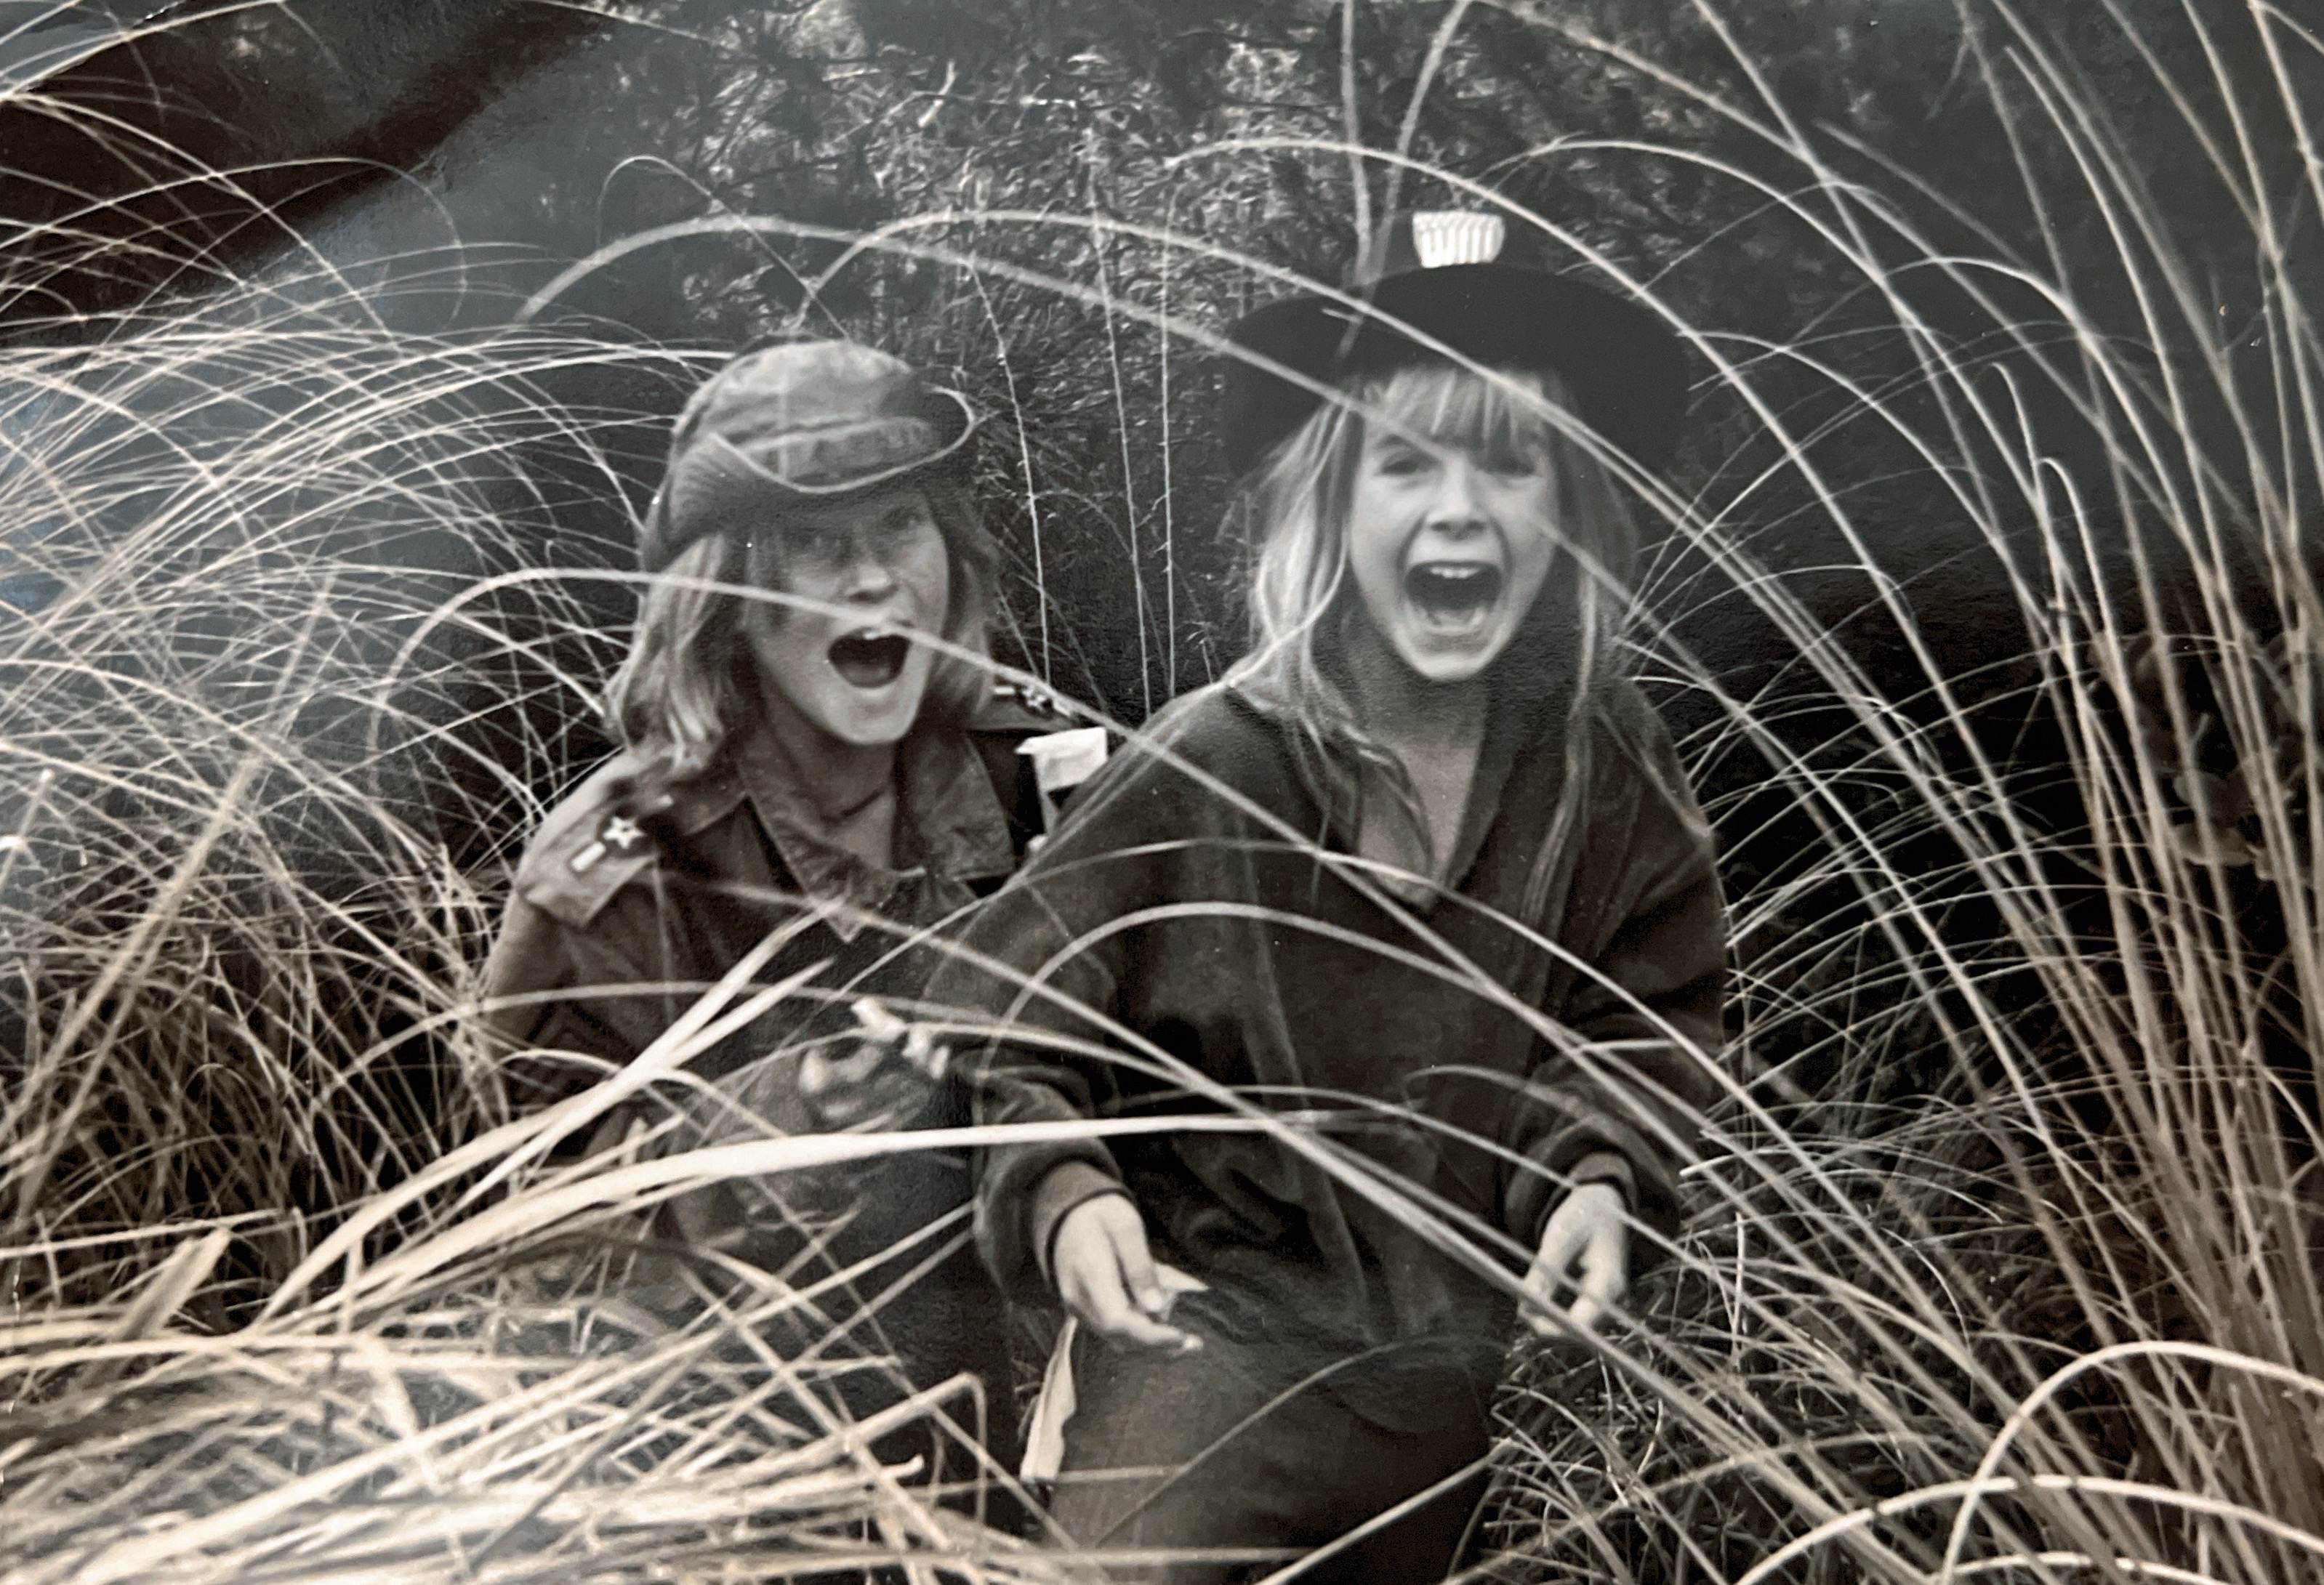 Classic photo of me and Vicky Dietrich in 1968. We were often the subject of Lindy‘s photography assignments (this one, kids at play). We had just done something a little bit naughty and were completely surprised to see her pop out of the bushes and take our picture.